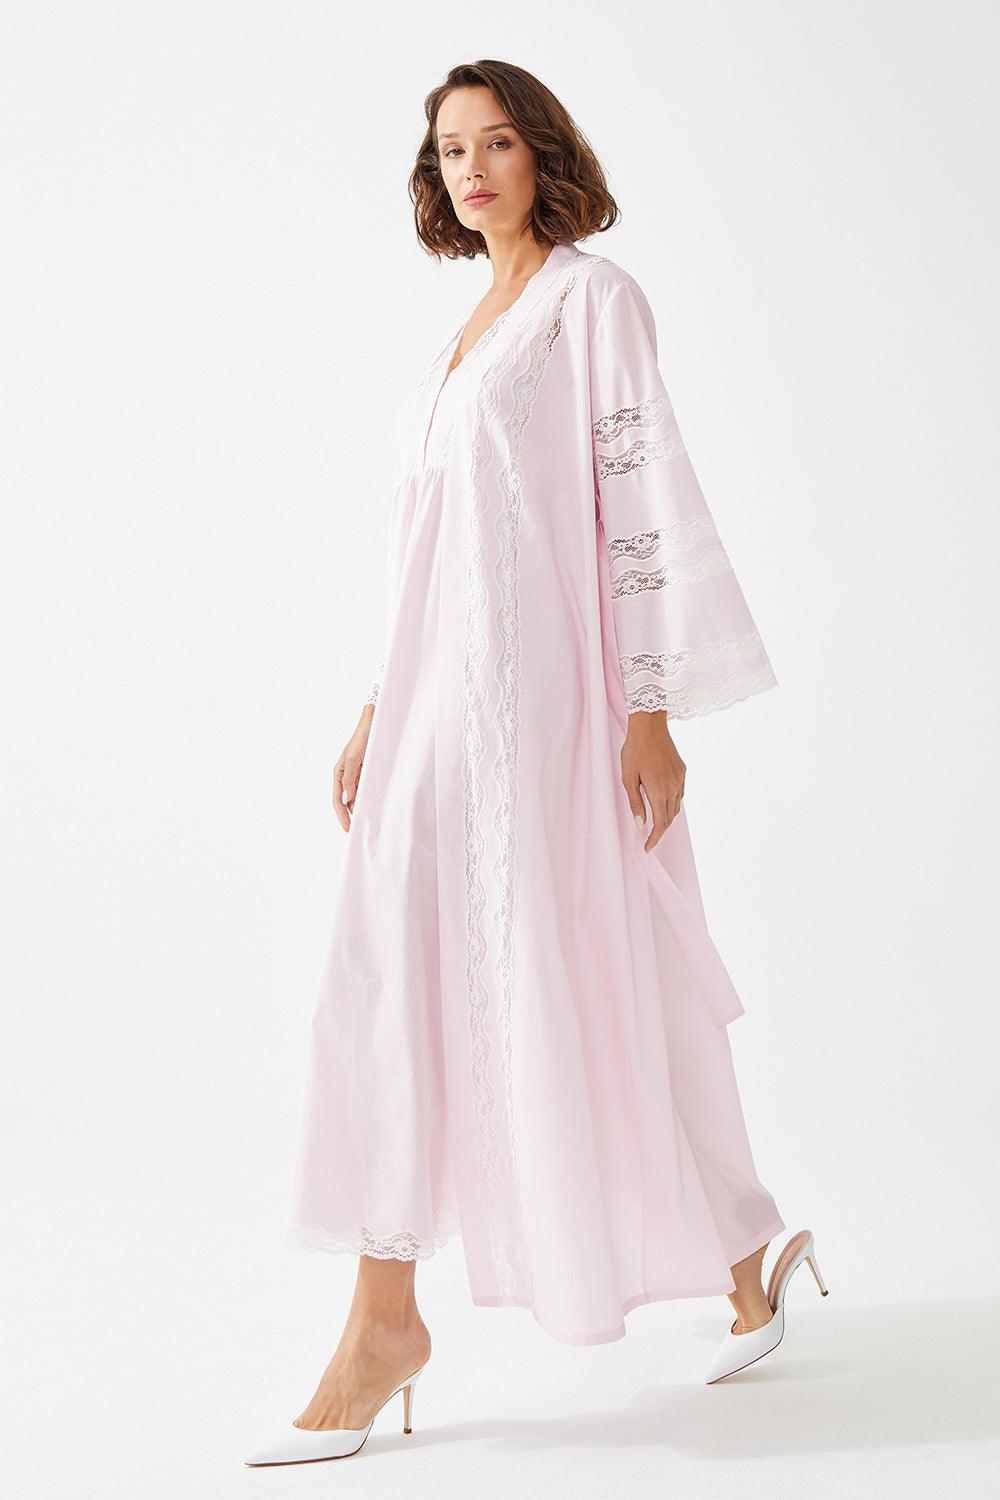 Leilani Trimmed Cotton Voile Long Sleeve Robe Set - Baby Pink - Bocan